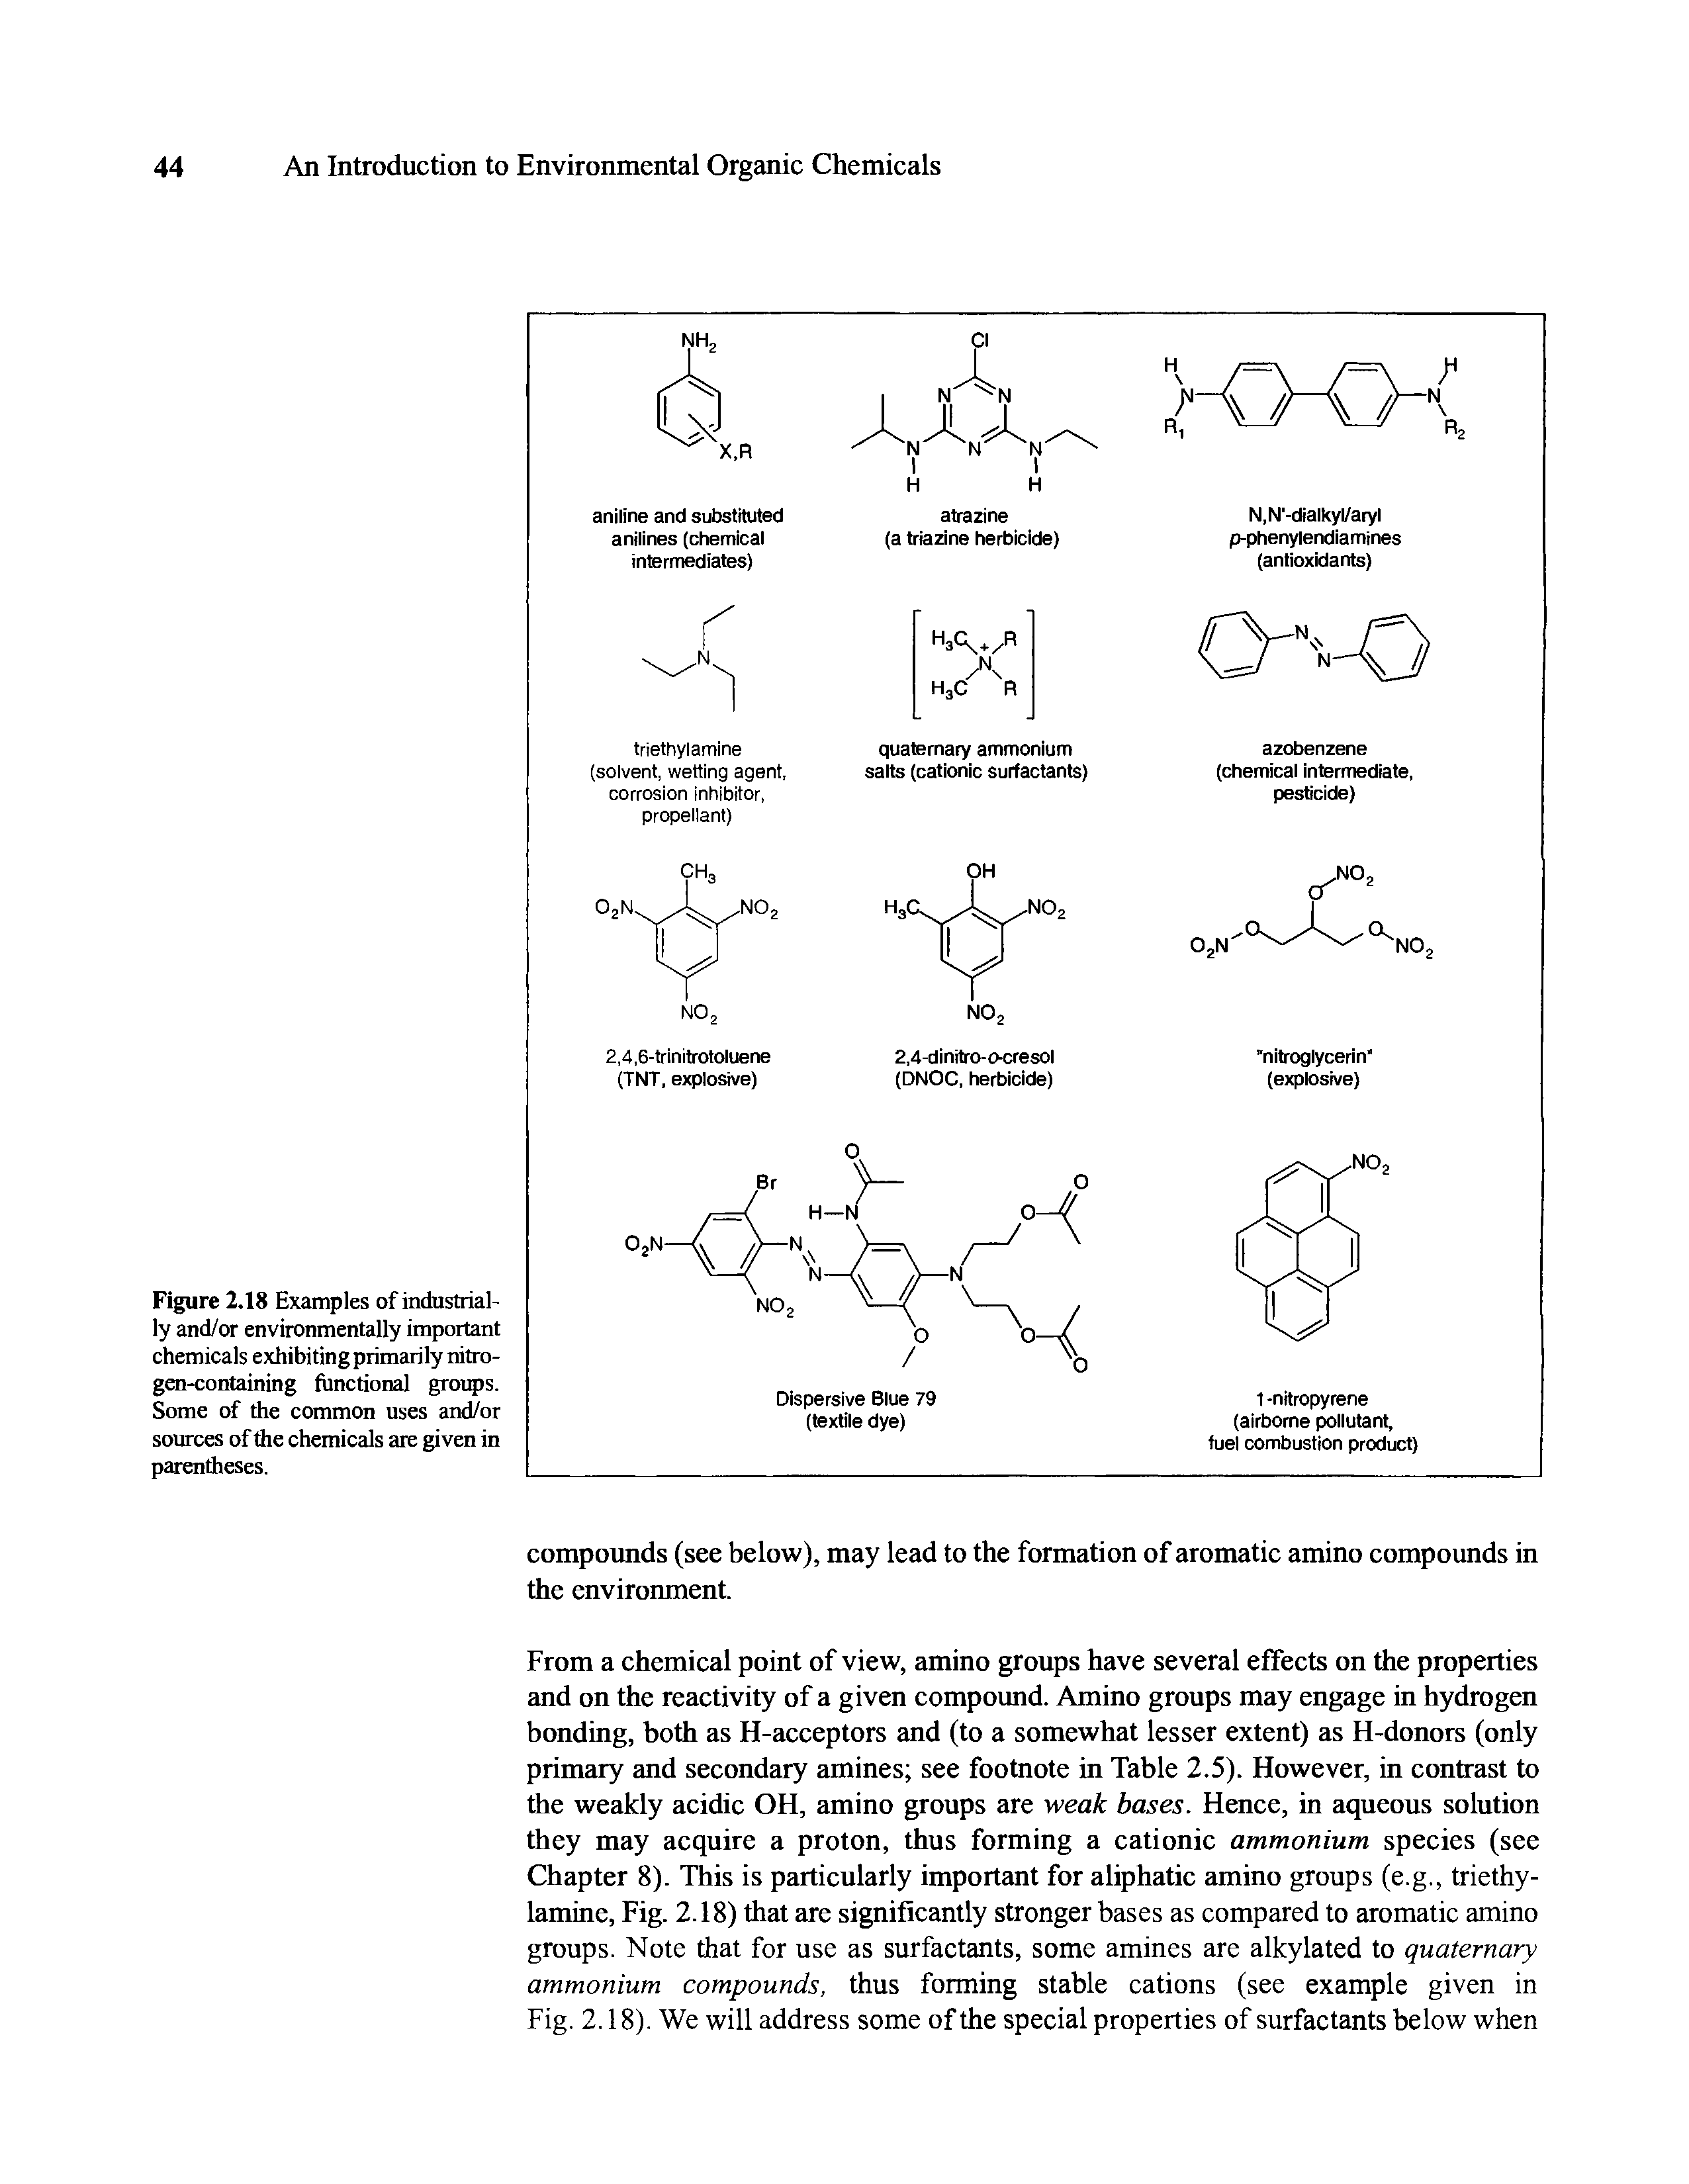 Figure 2.18 Examples of industrially and/or environmentally important chemicals exhibiting primarily nitrogen-containing functional groups. Some of the common uses and/or sources of the chemicals are given in parentheses.